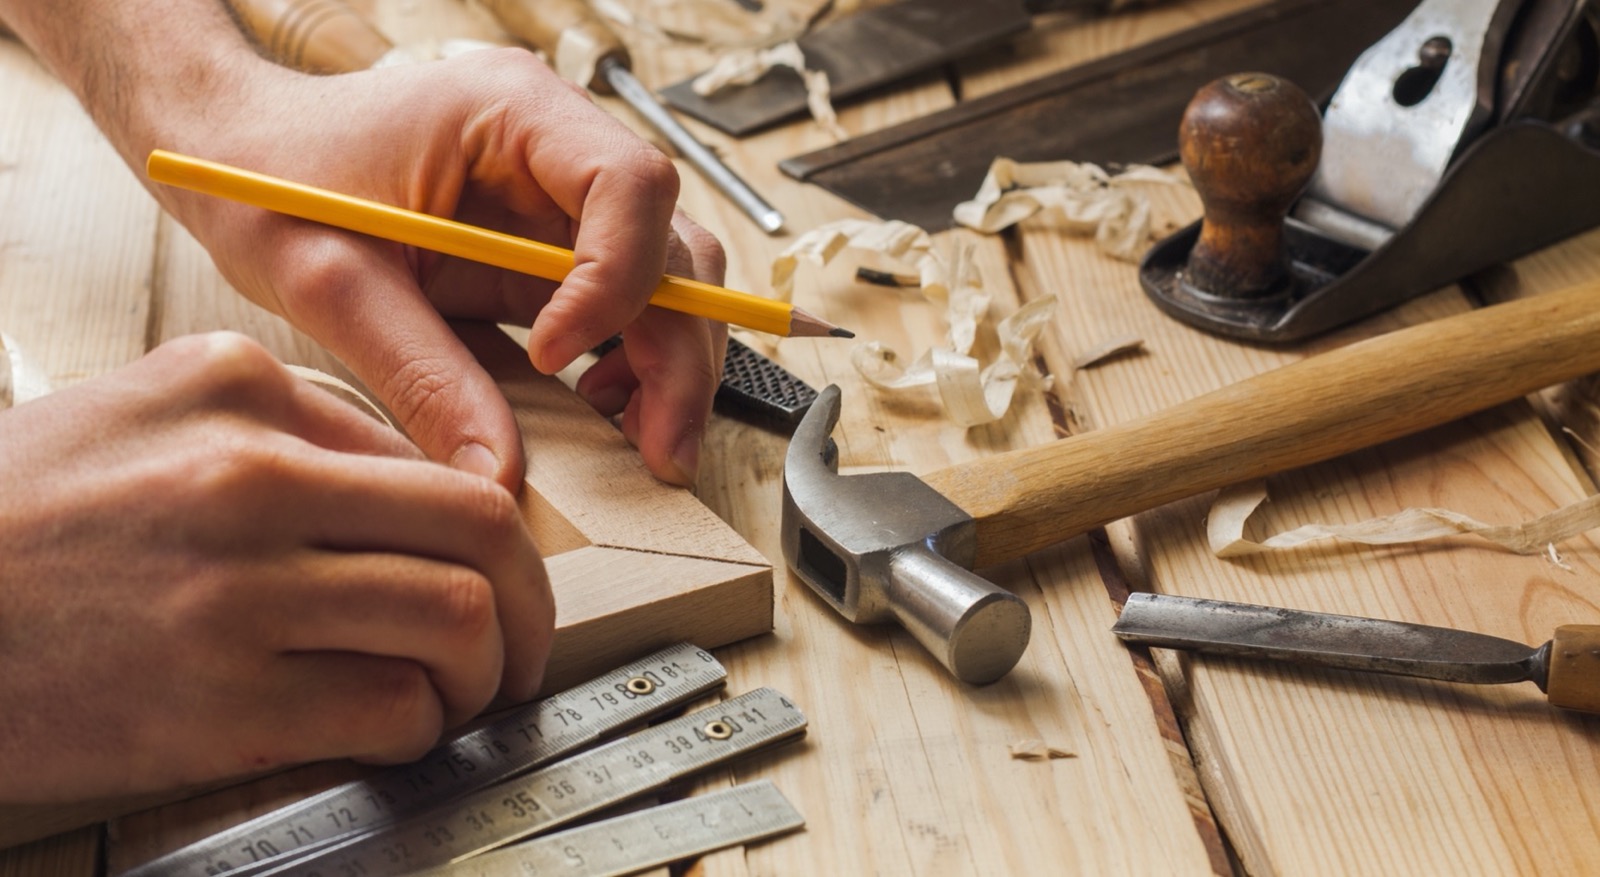 Can You Go 20/20 on This General Knowledge Quiz Where All the Answers Are Numbers? Carpentry Carpenter Wood